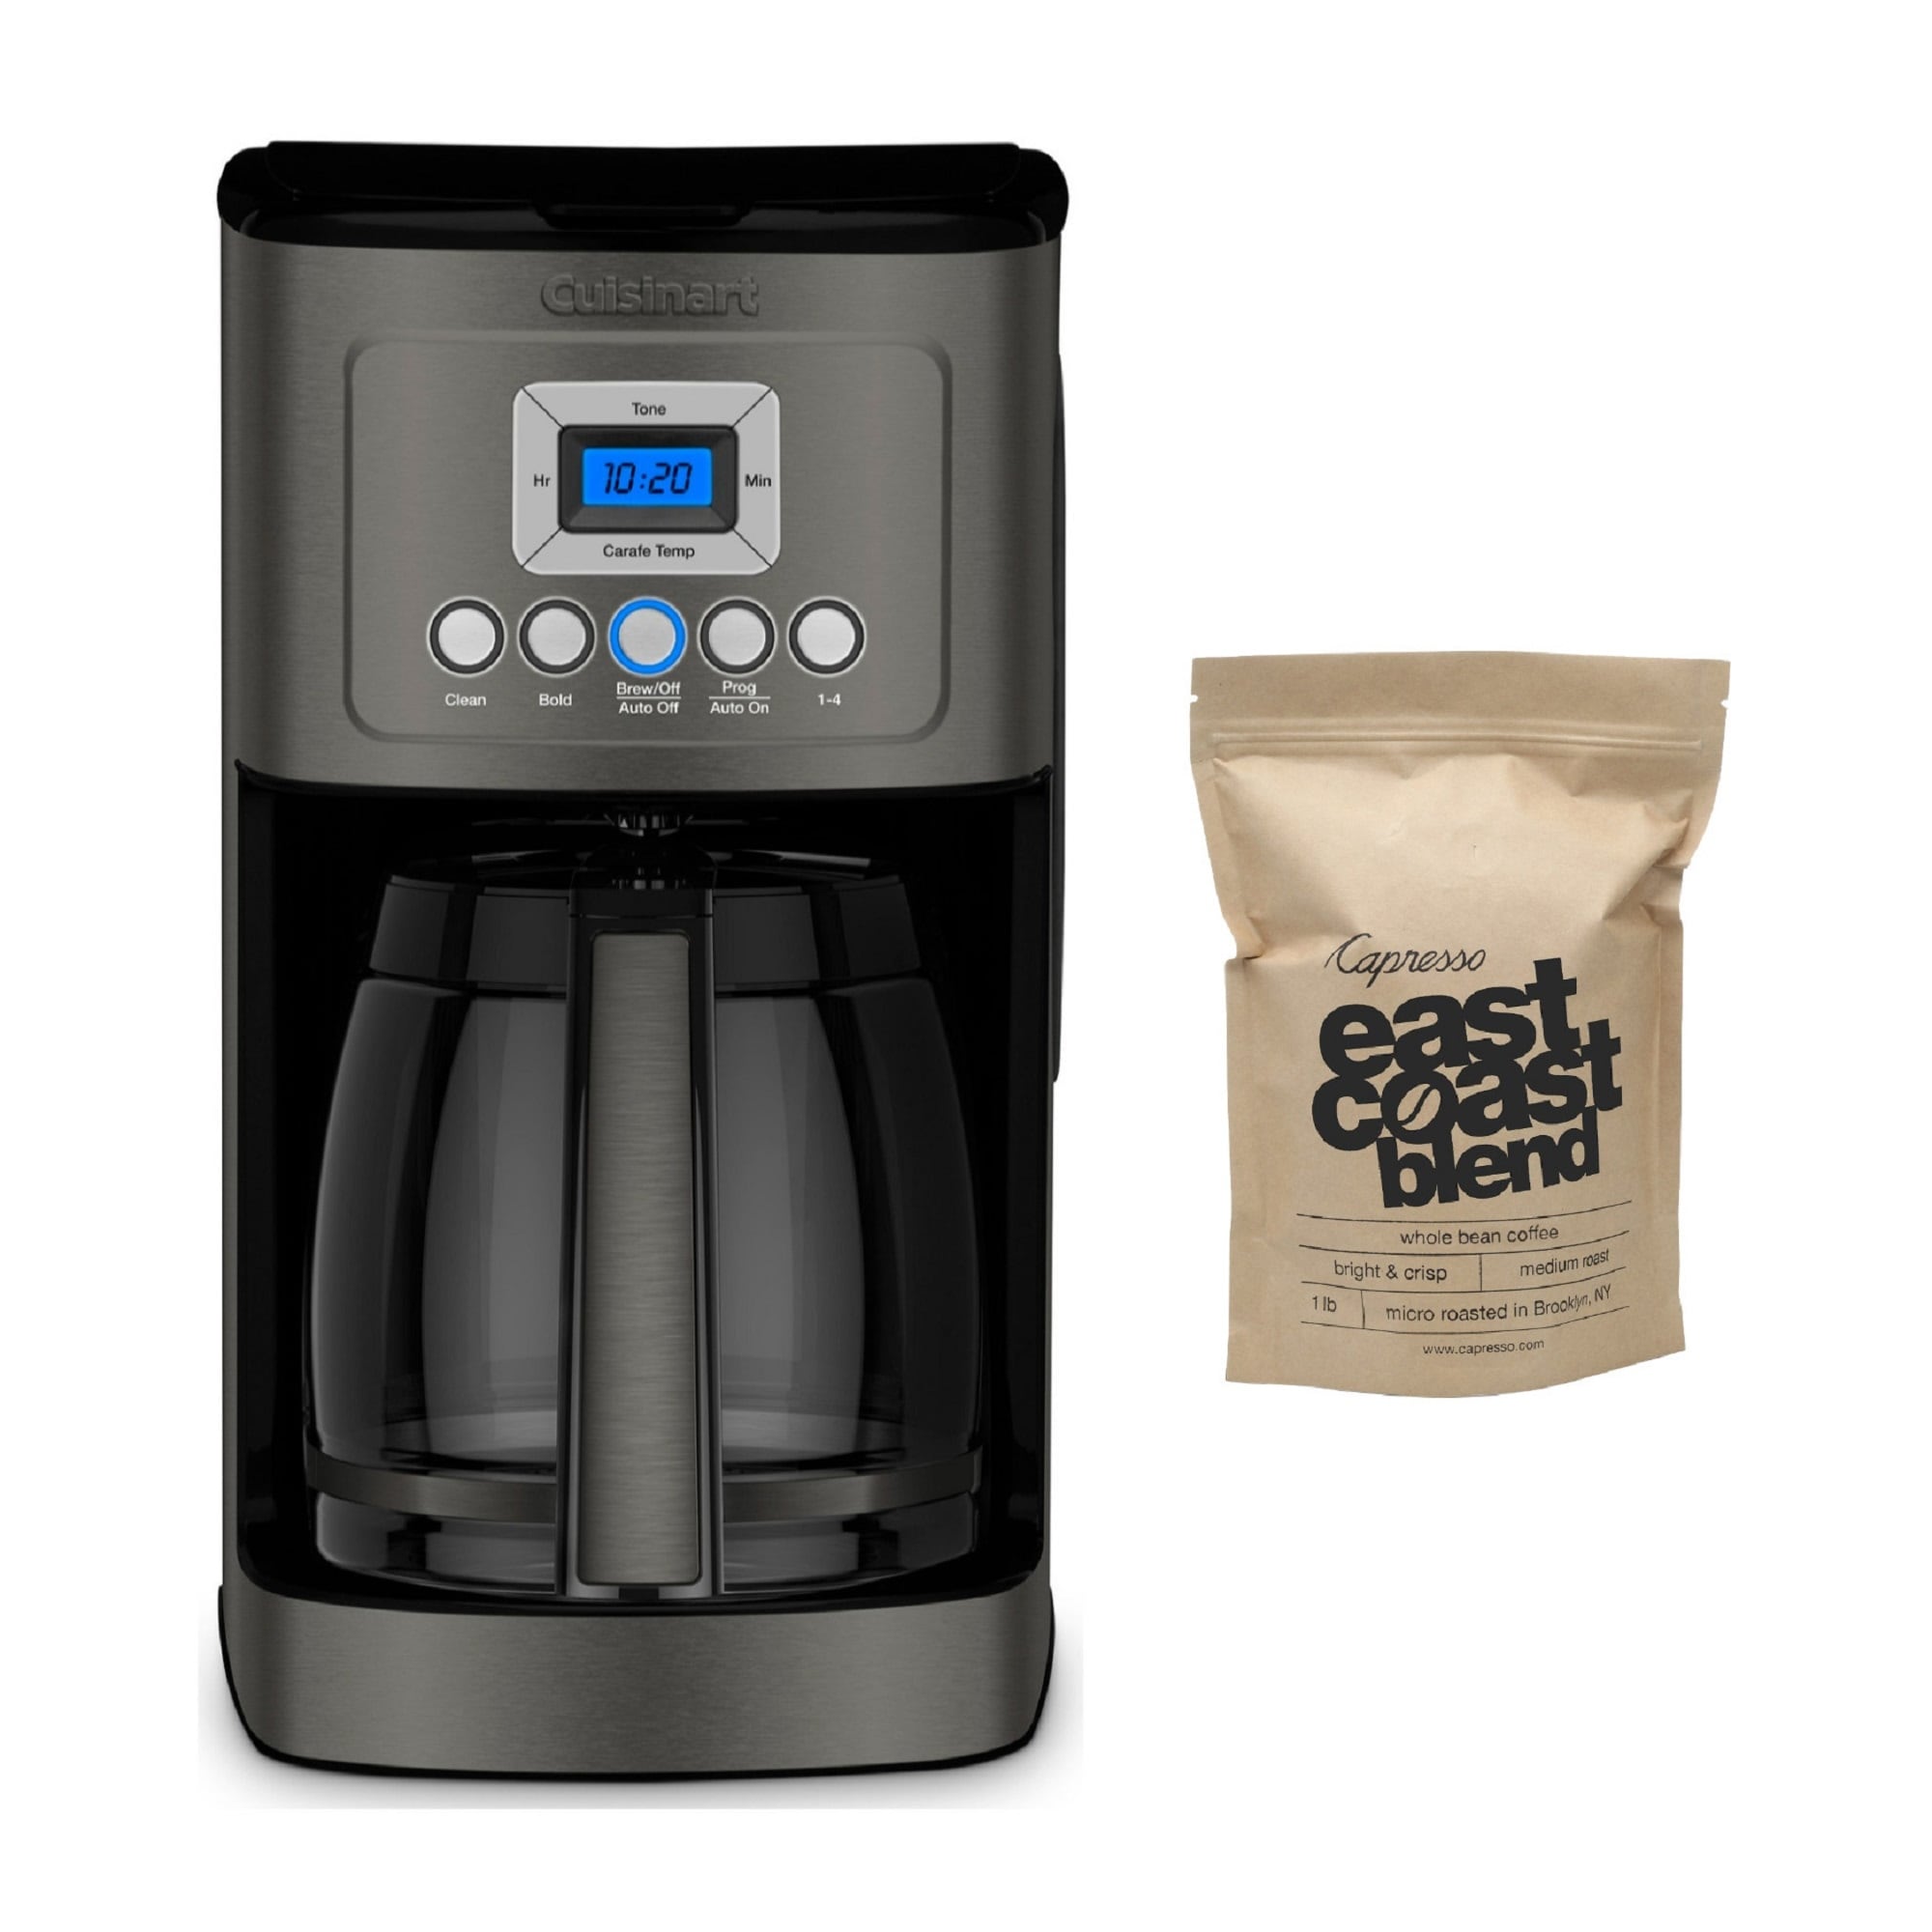 https://ak1.ostkcdn.com/images/products/is/images/direct/c51ac06a9f97bb8205fea141edc530c80707d5a6/Cuisinart-14-Cup-Programmable-Coffeemaker-with-Whole-Bean-Coffee.jpg